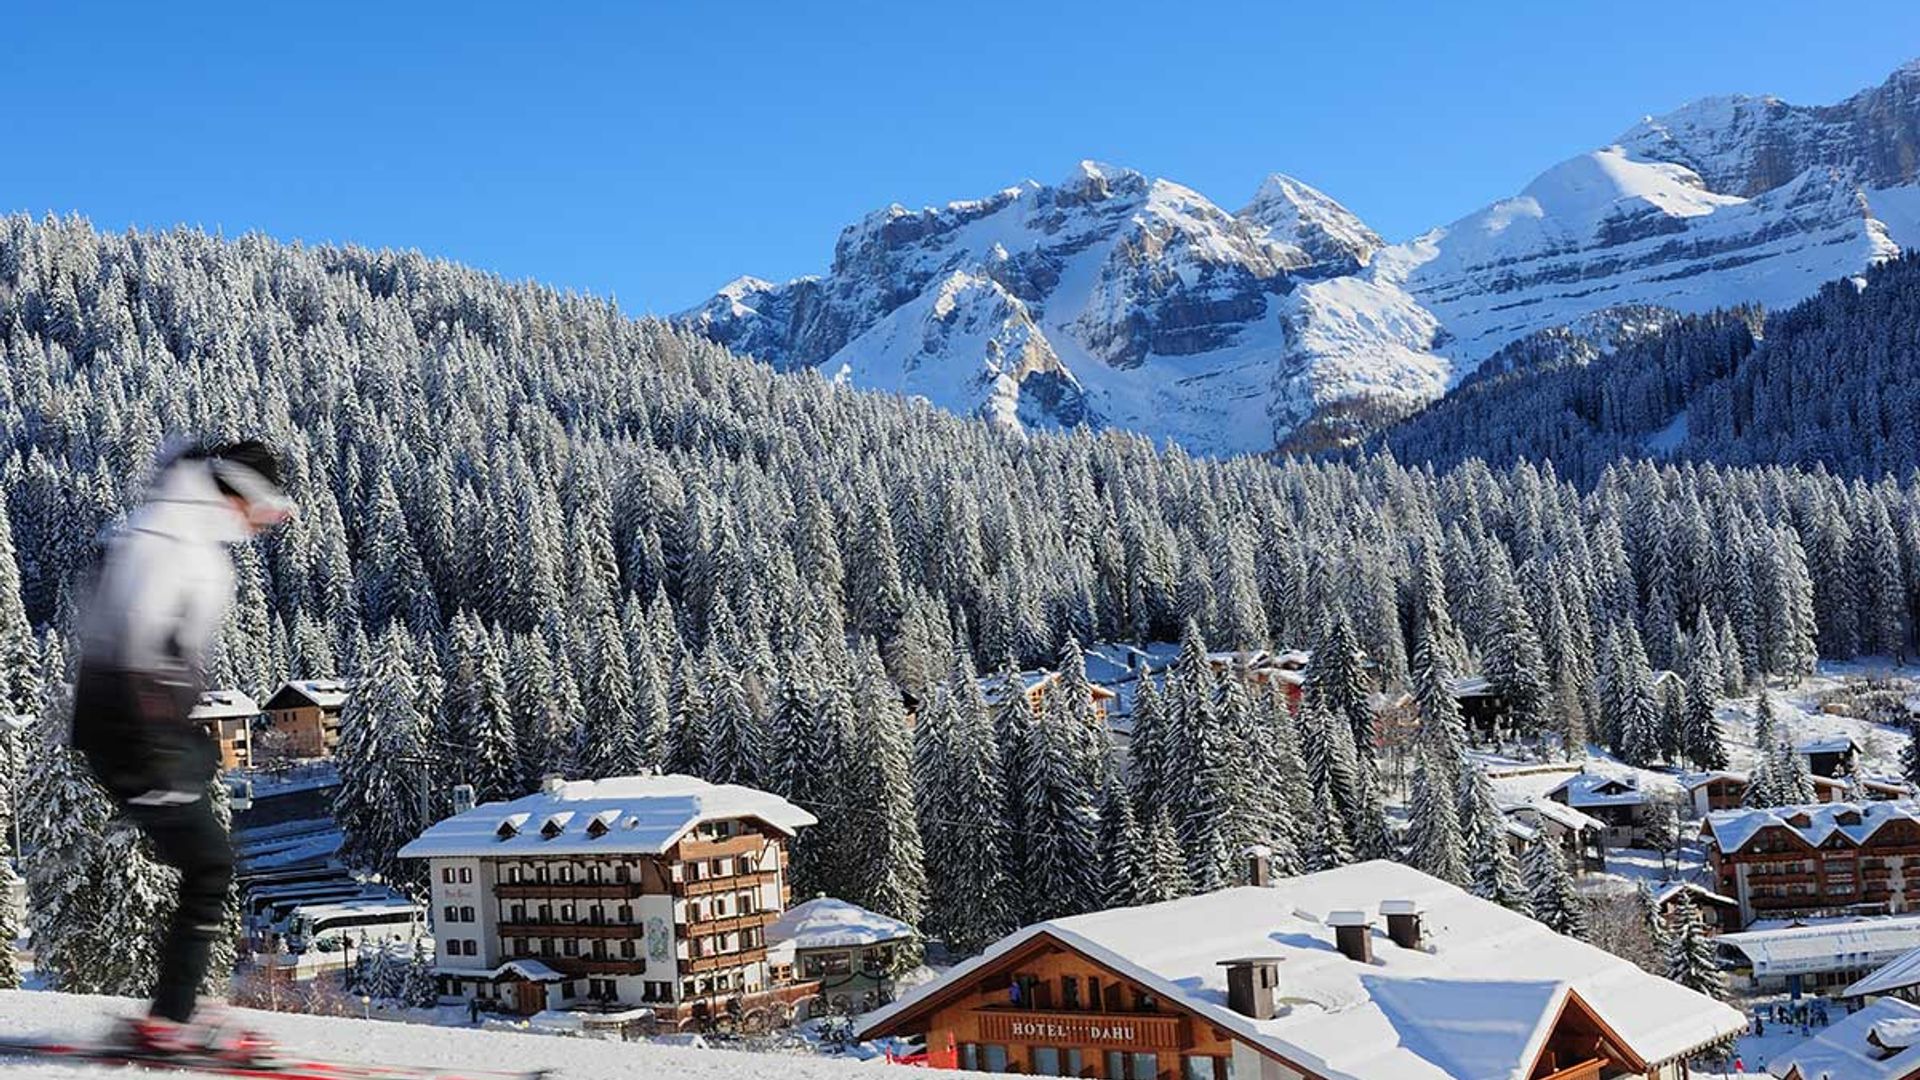 Planning a ski trip? Why Hotel Rosengarten in the heart of Madonna di Campiglio is the perfect getaway